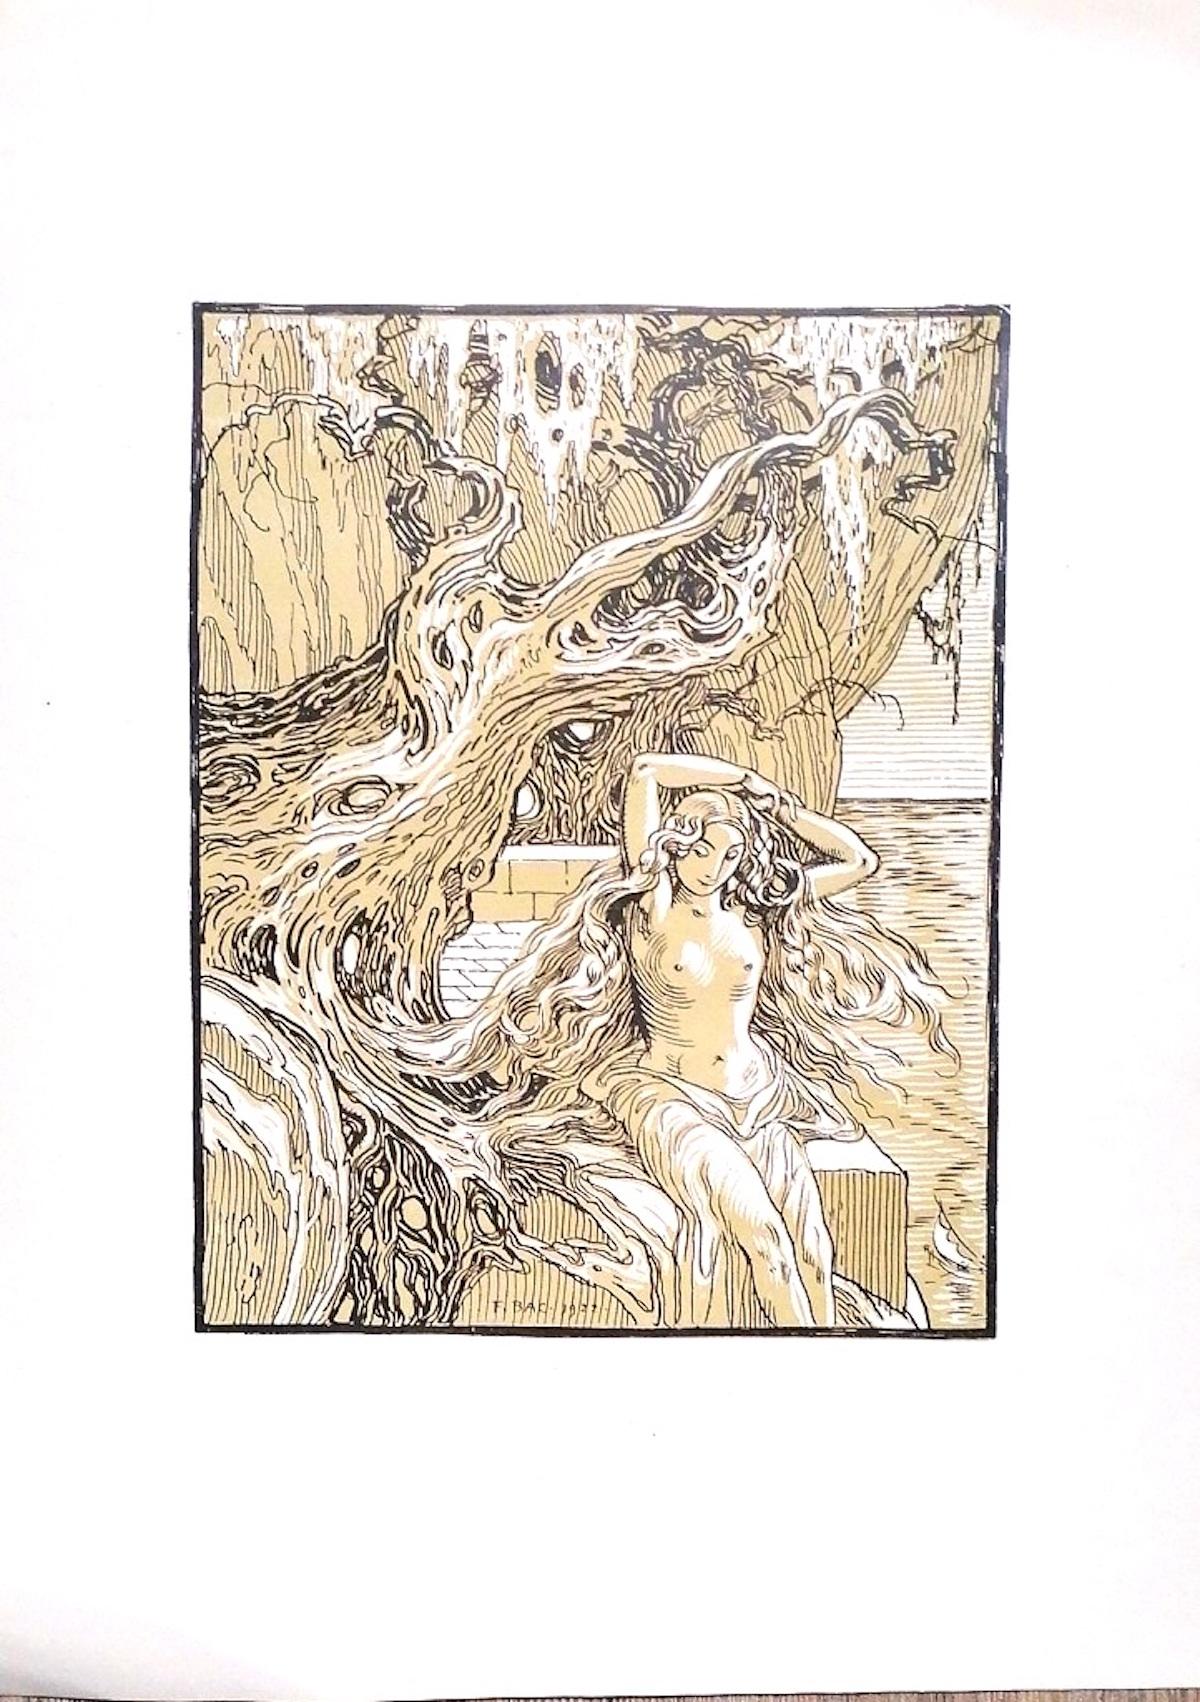 The Siren - Lithograph by Ferdinand Bac - 1922